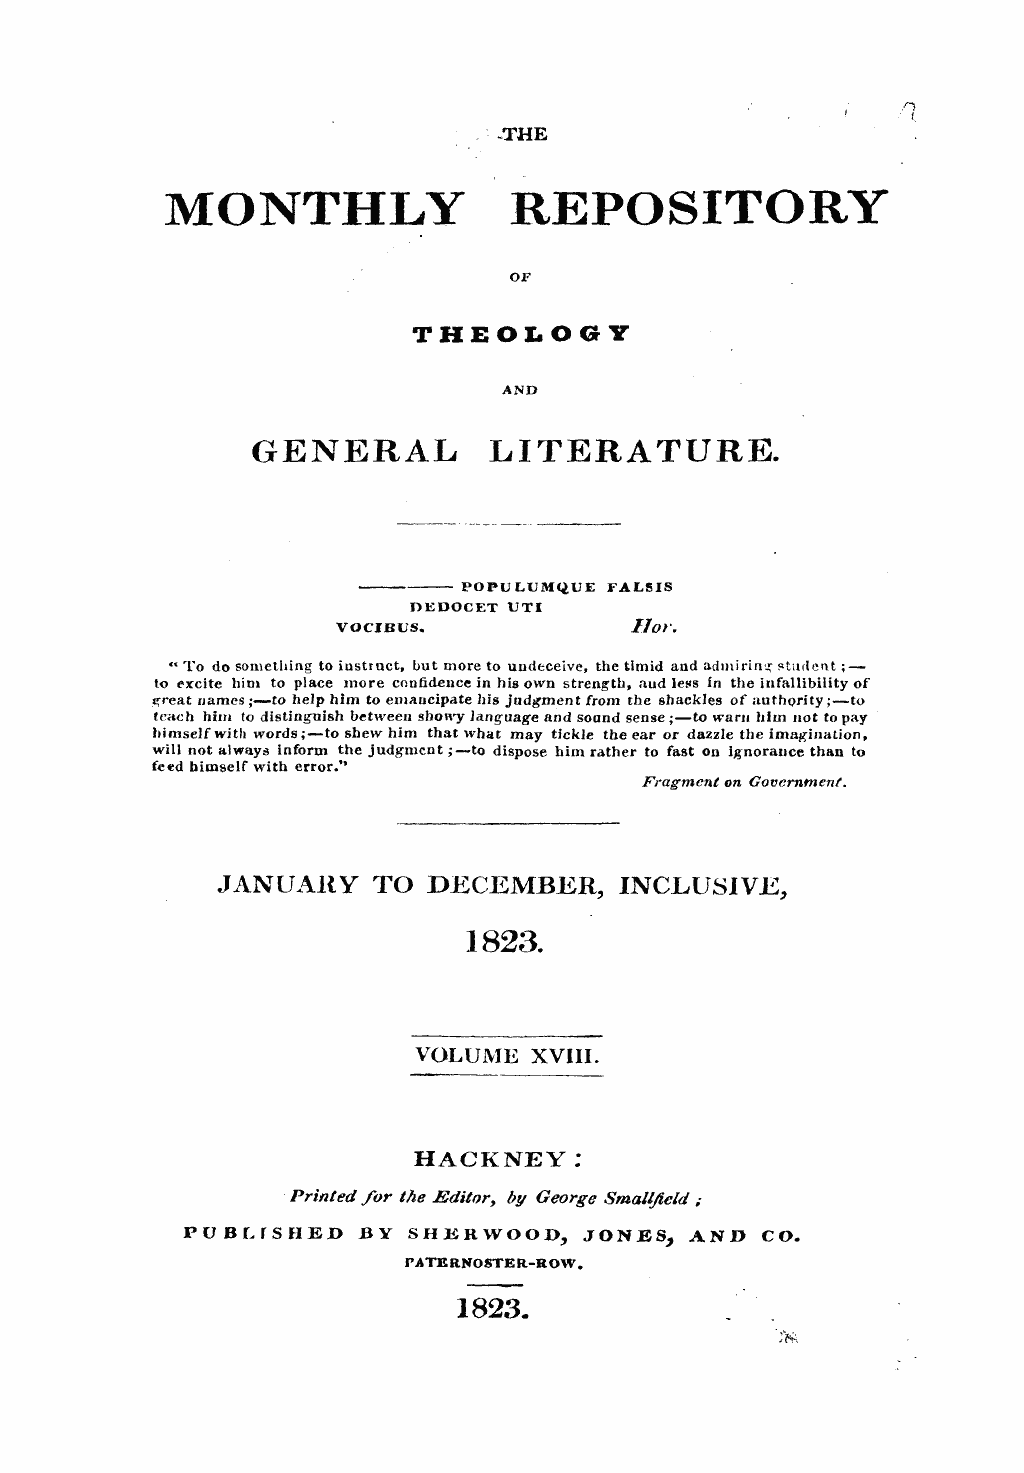 Monthly Repository (1806-1838) and Unitarian Chronicle (1832-1833): F Y, 1st edition, Front matter - Untitled Article